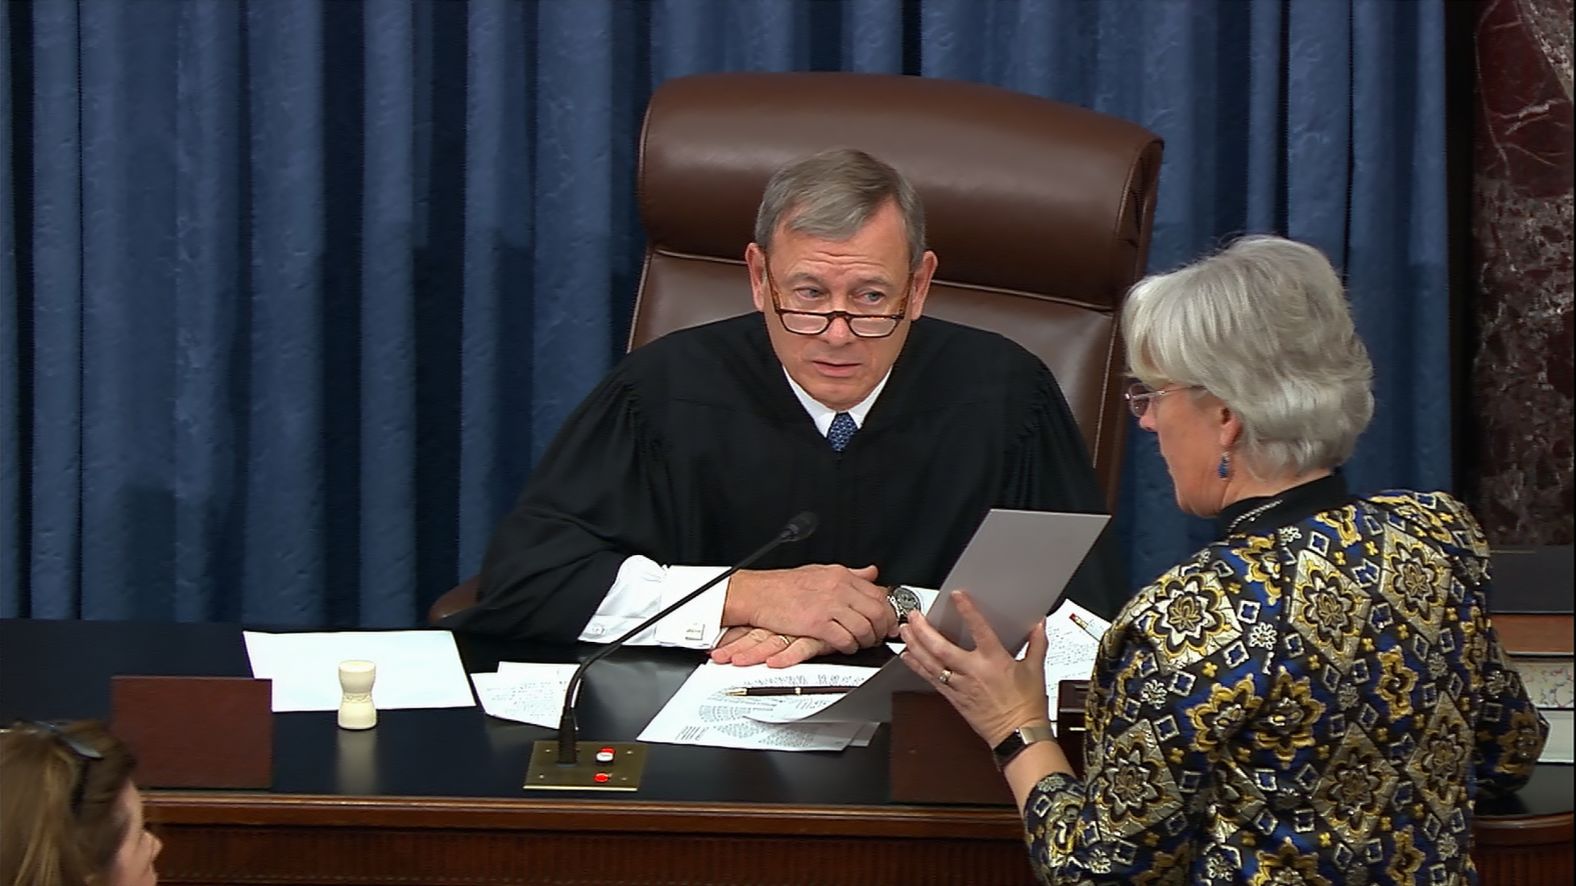 Chief Justice John Roberts addresses the Senate on Friday, January 31, after it voted to block any witnesses from being called in the trial. <a href="index.php?page=&url=https%3A%2F%2Fwww.cnn.com%2F2020%2F01%2F31%2Fpolitics%2Fsenate-impeachment-trial-last-day%2Findex.html" target="_blank">The move</a> marked the beginning of the trial's end.